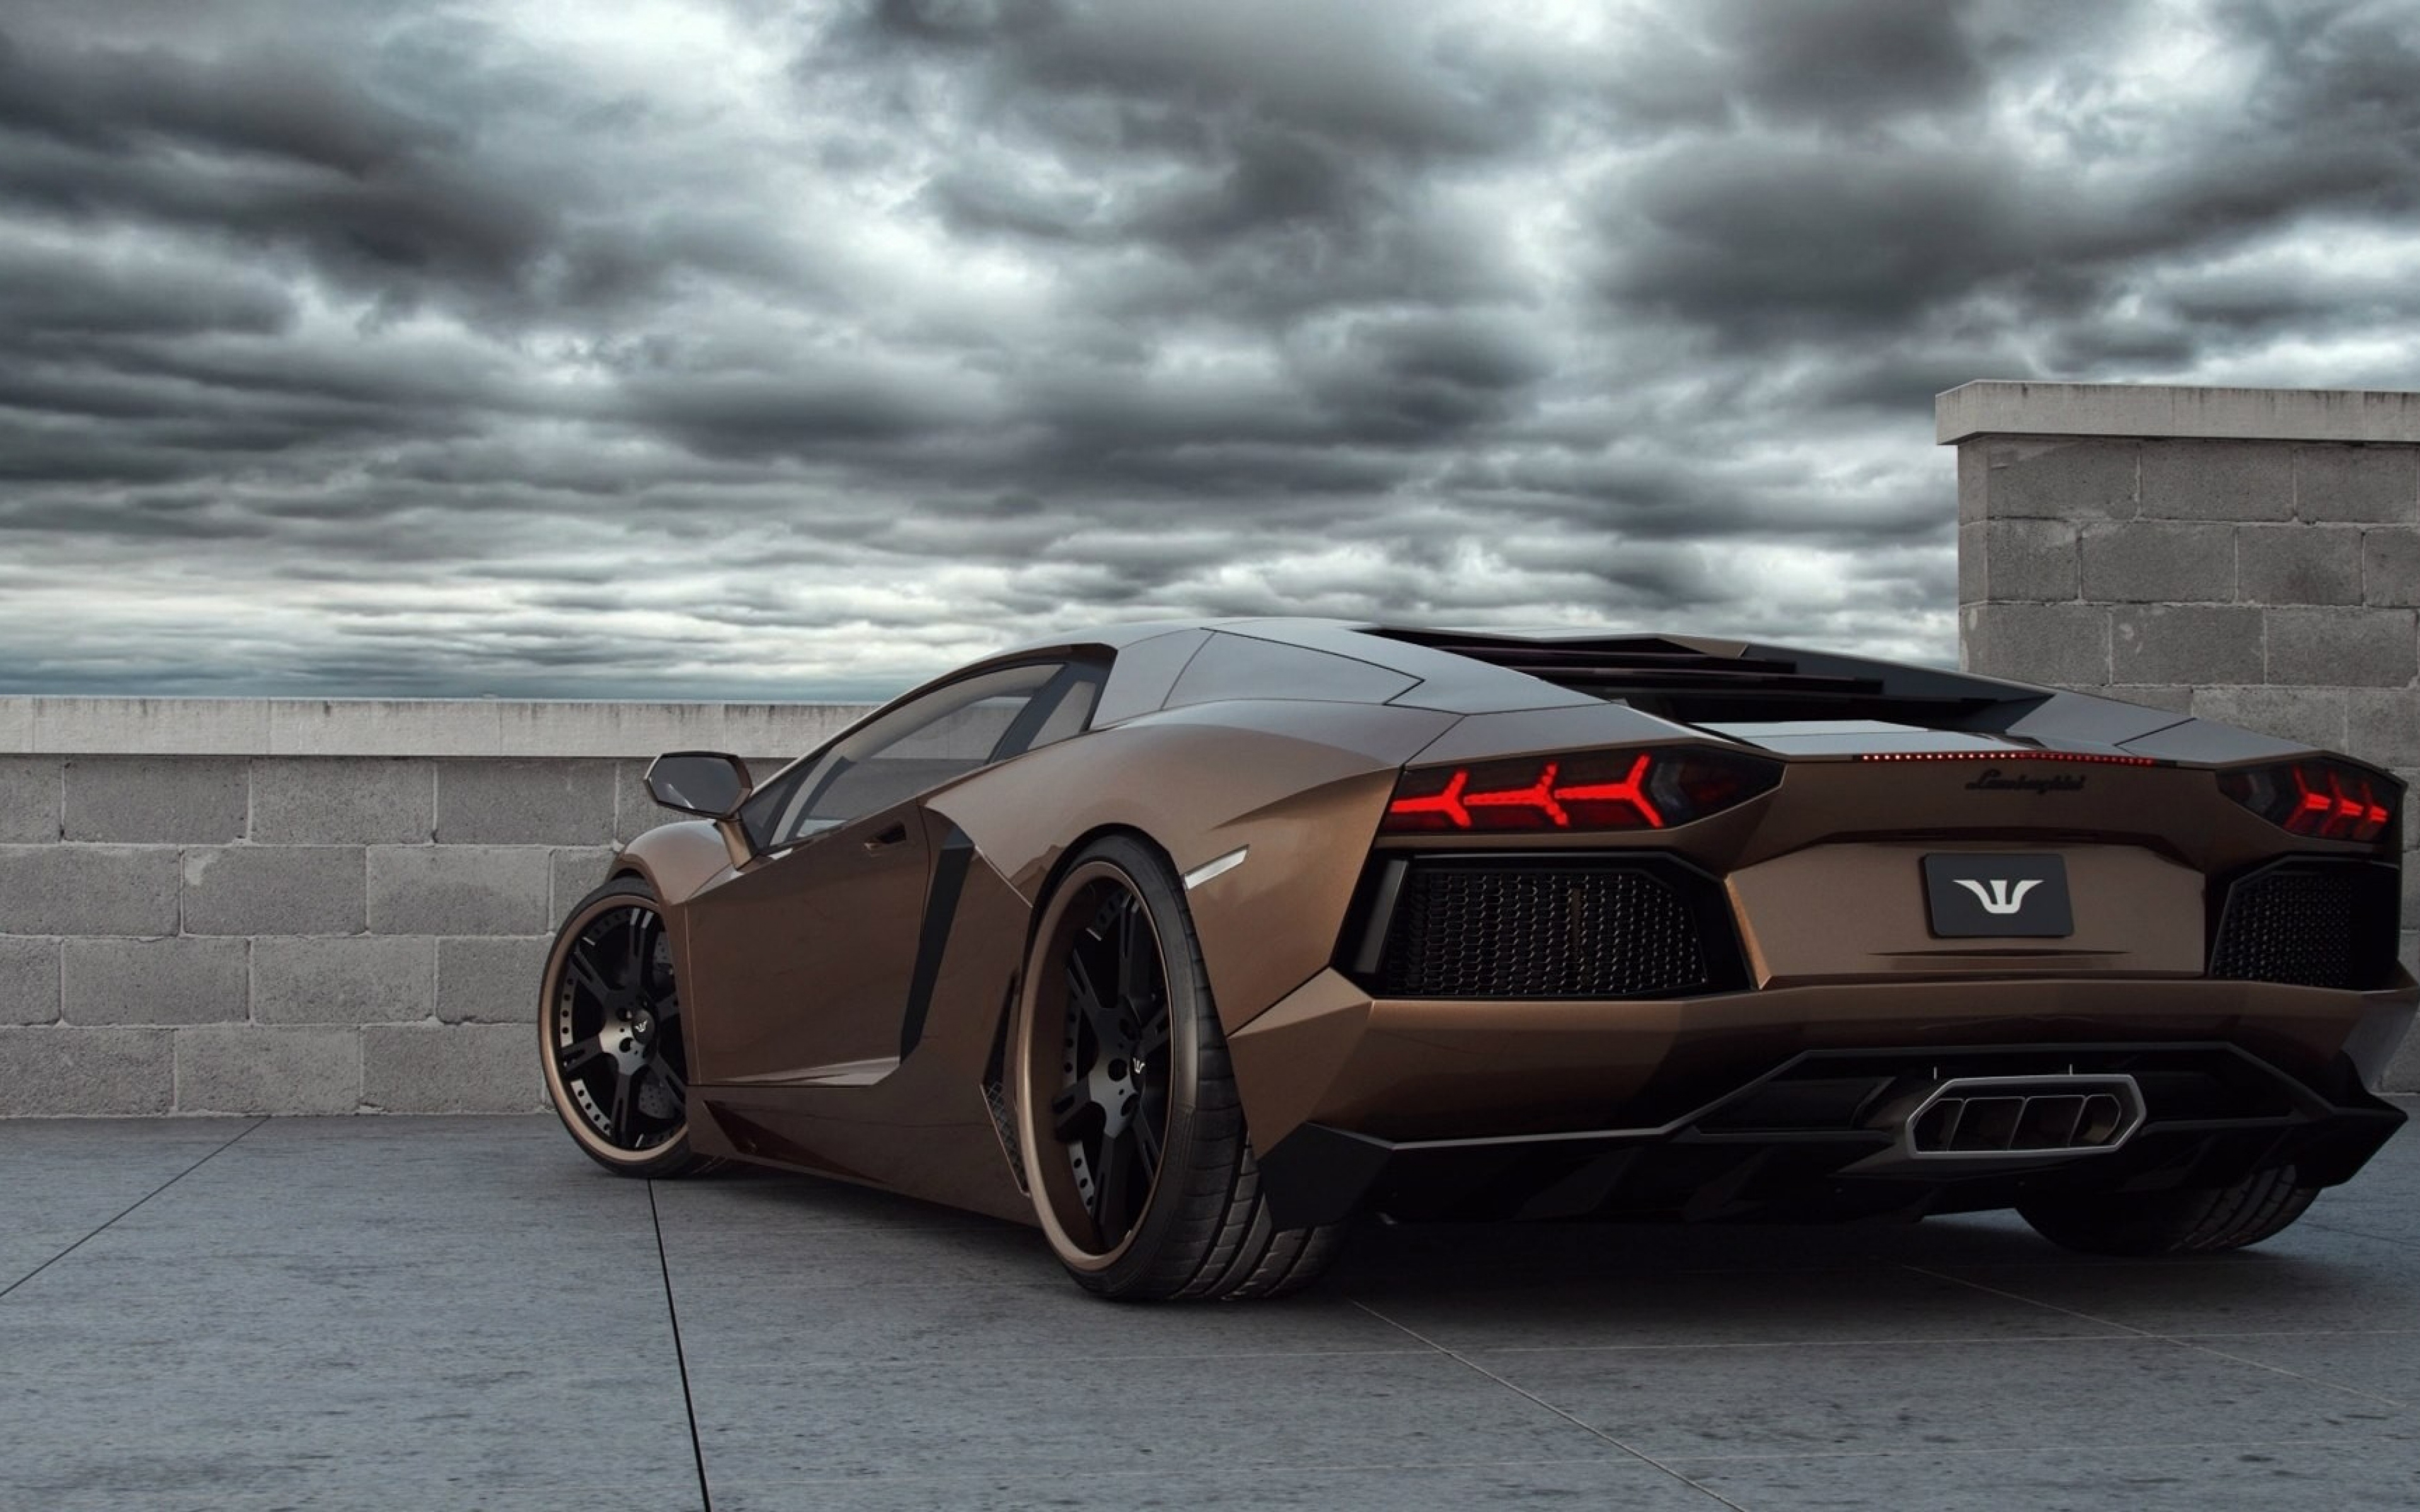  download Lamborghini Wallpapers and Background Images 3840x2400